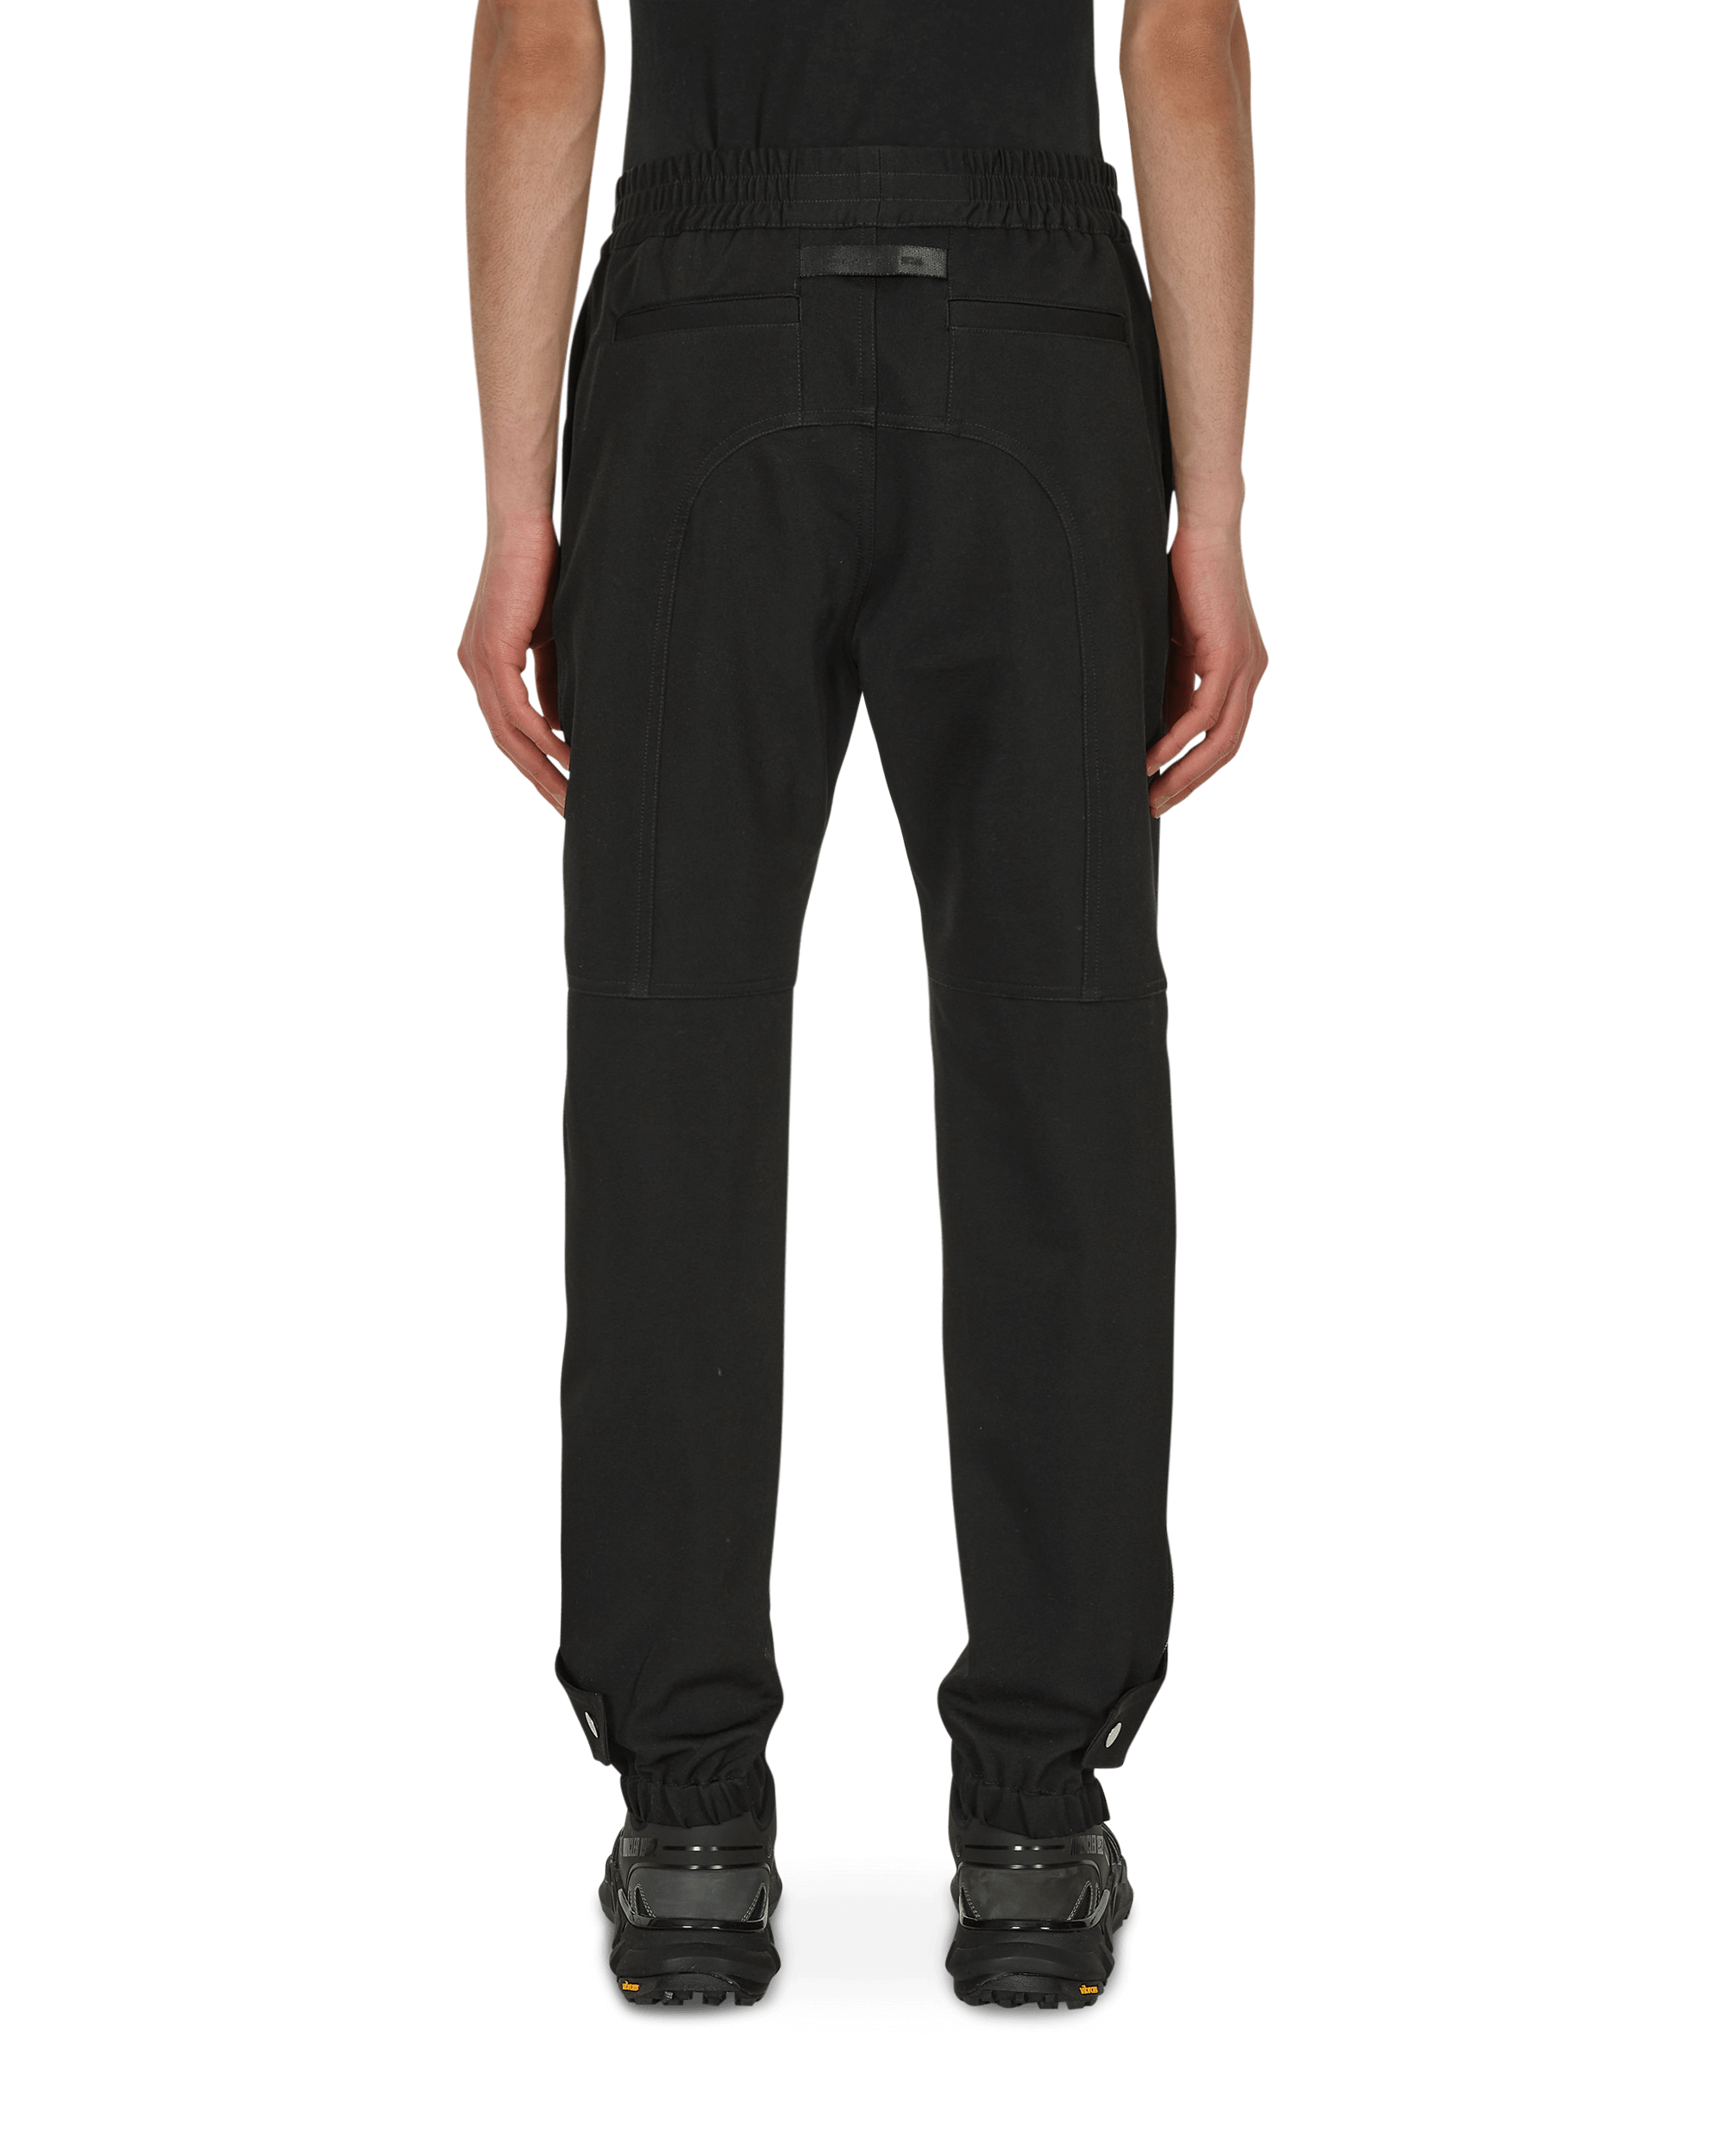 1017 Alyx 9SM Trackpant - 2 Black Pants Trousers AAMPA0162FA02 BLK0001